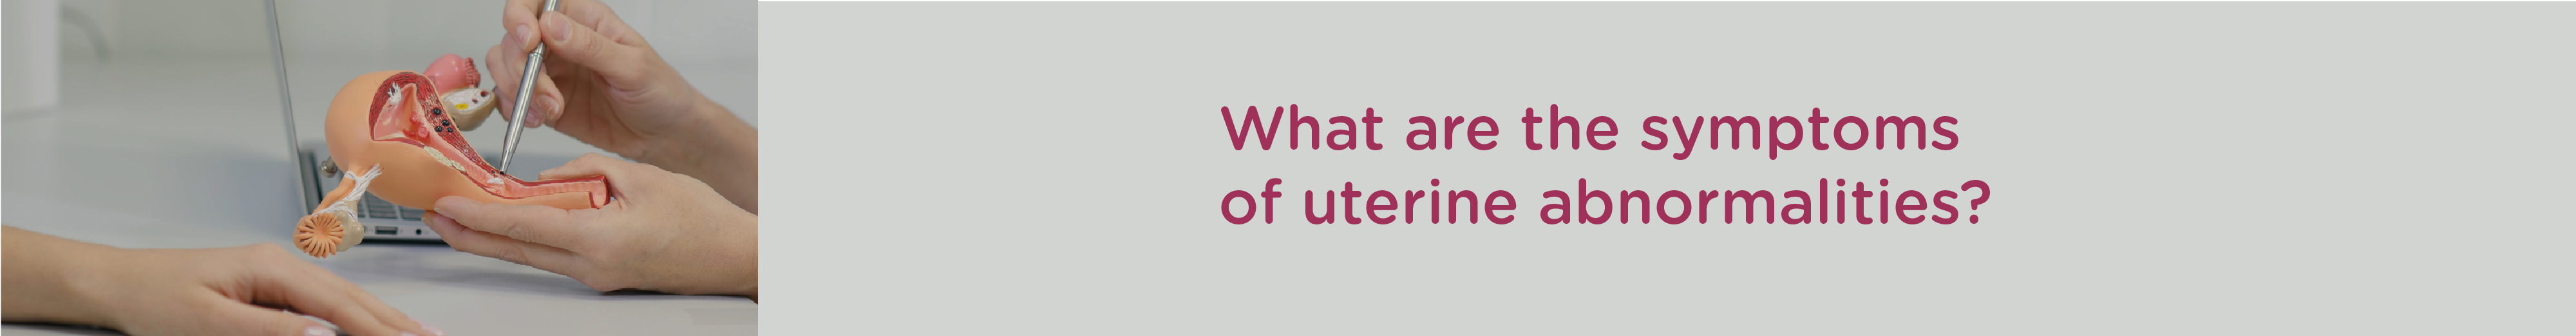 What are the Symptoms of Uterine Abnormalities?